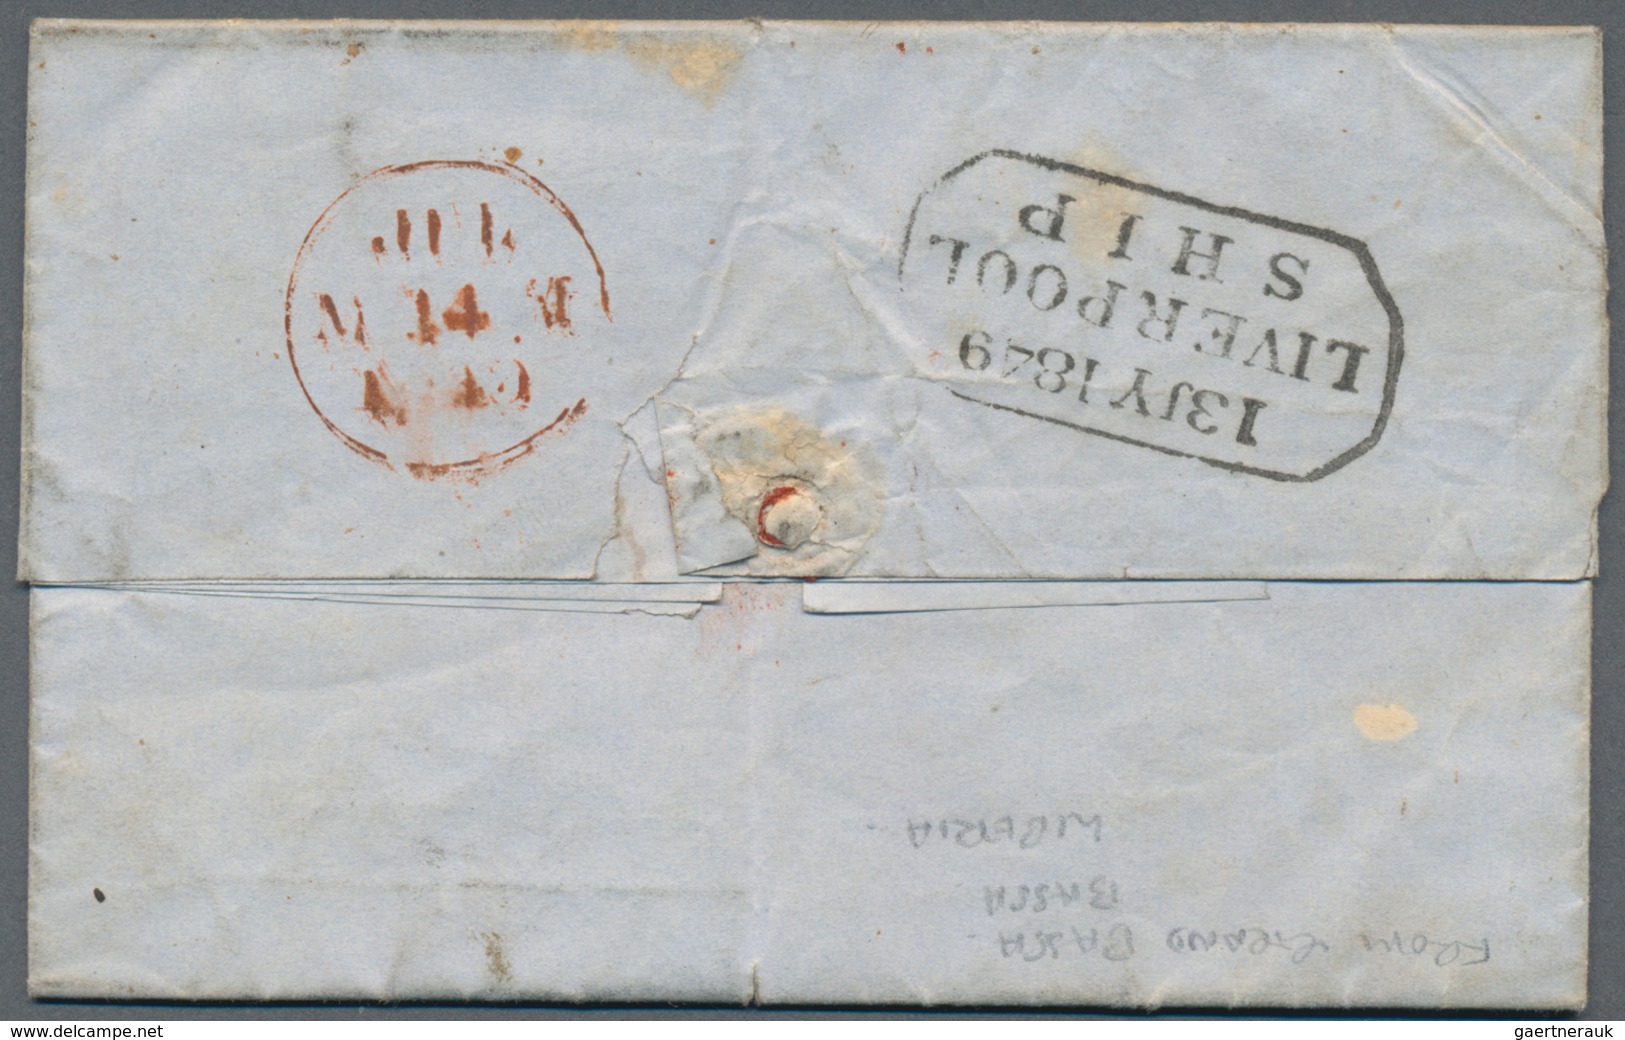 Liberia: 1849, Complete Folded Letter Written "Off The Coast Of Africa" By An Grand Bassa Inhabitant - Liberia